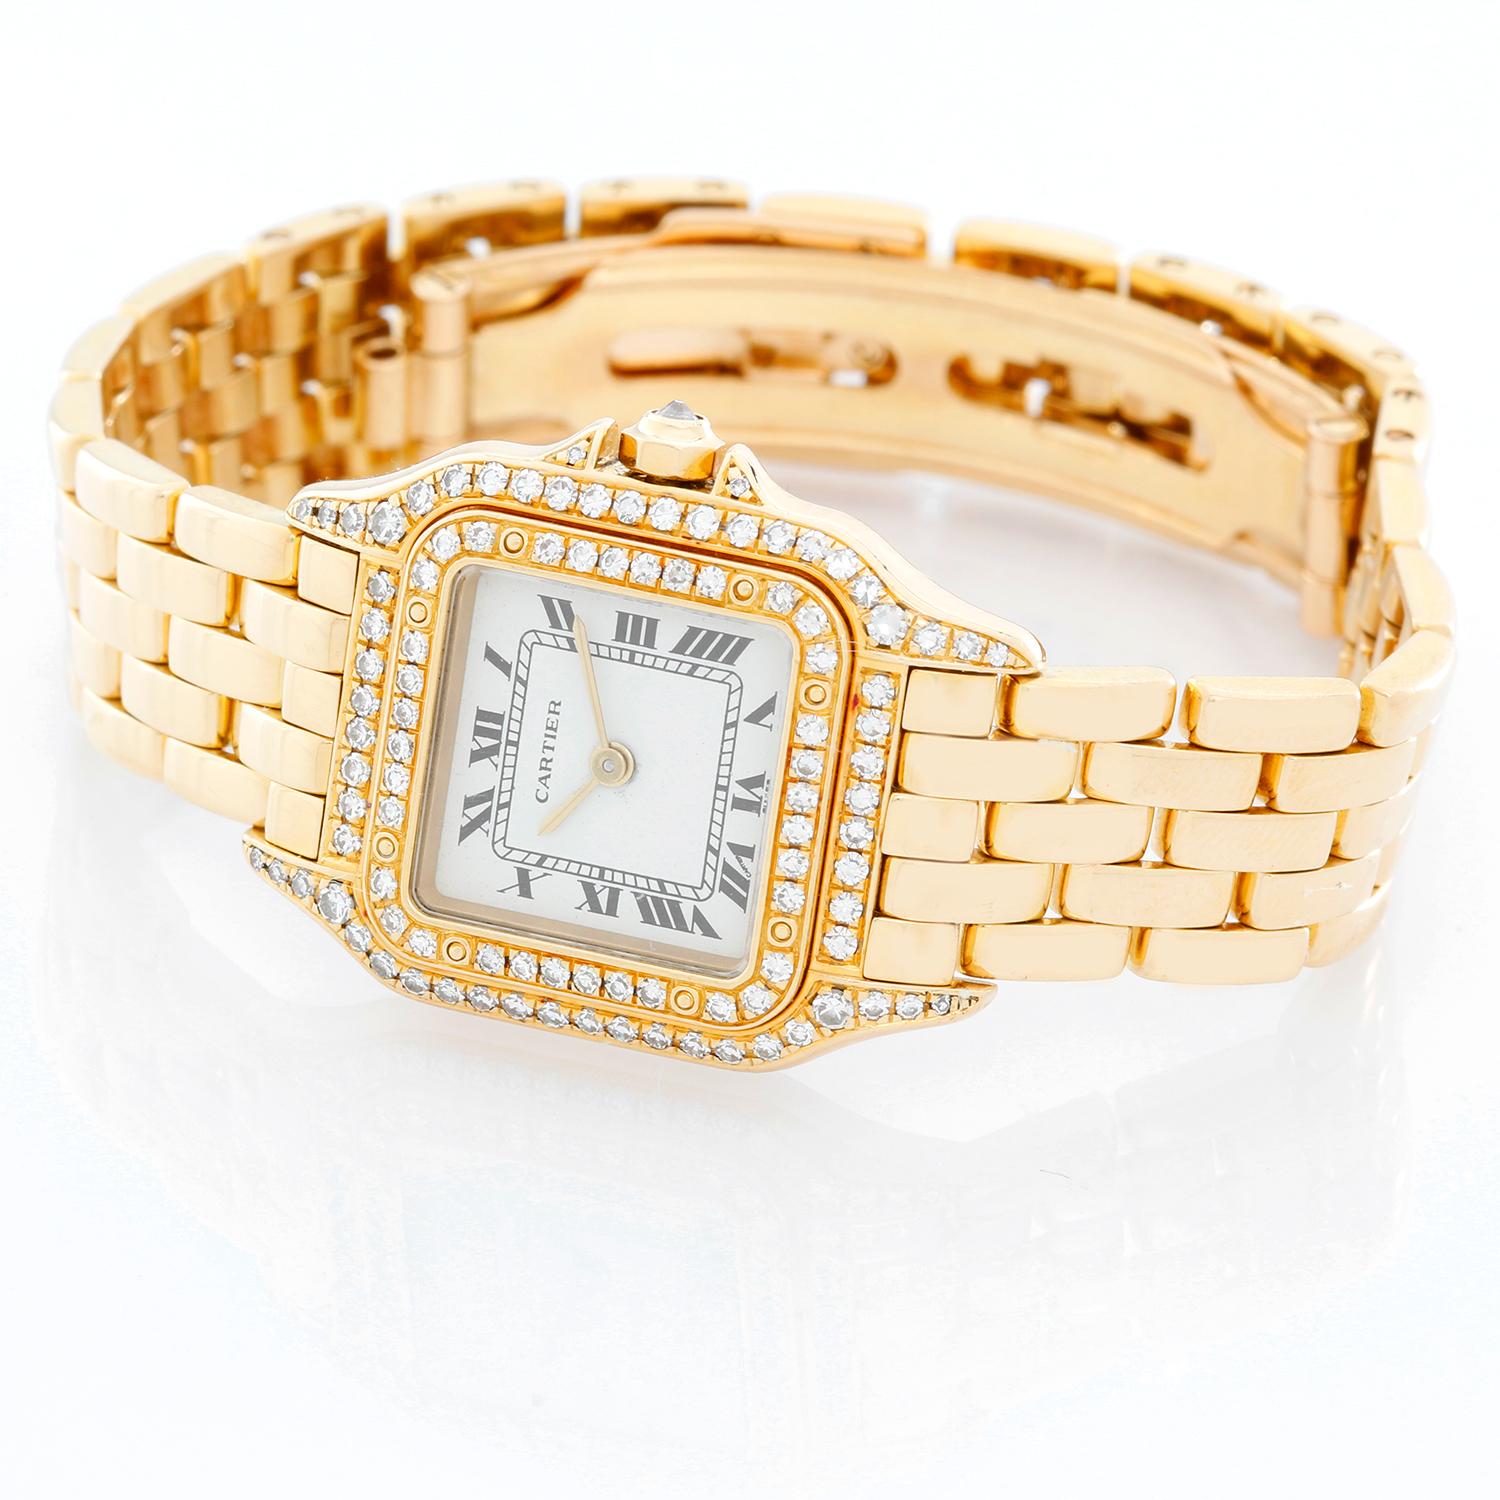 Cartier Panther Ladies 18k Yellow Gold Diamond Watch - Quartz. 18k yellow gold case with factory diamond bezel (22mm x 30mm). Ivory colored dial with black Roman numerals . 18k yellow gold Panther bracelet. Pre-owned with box and book. 